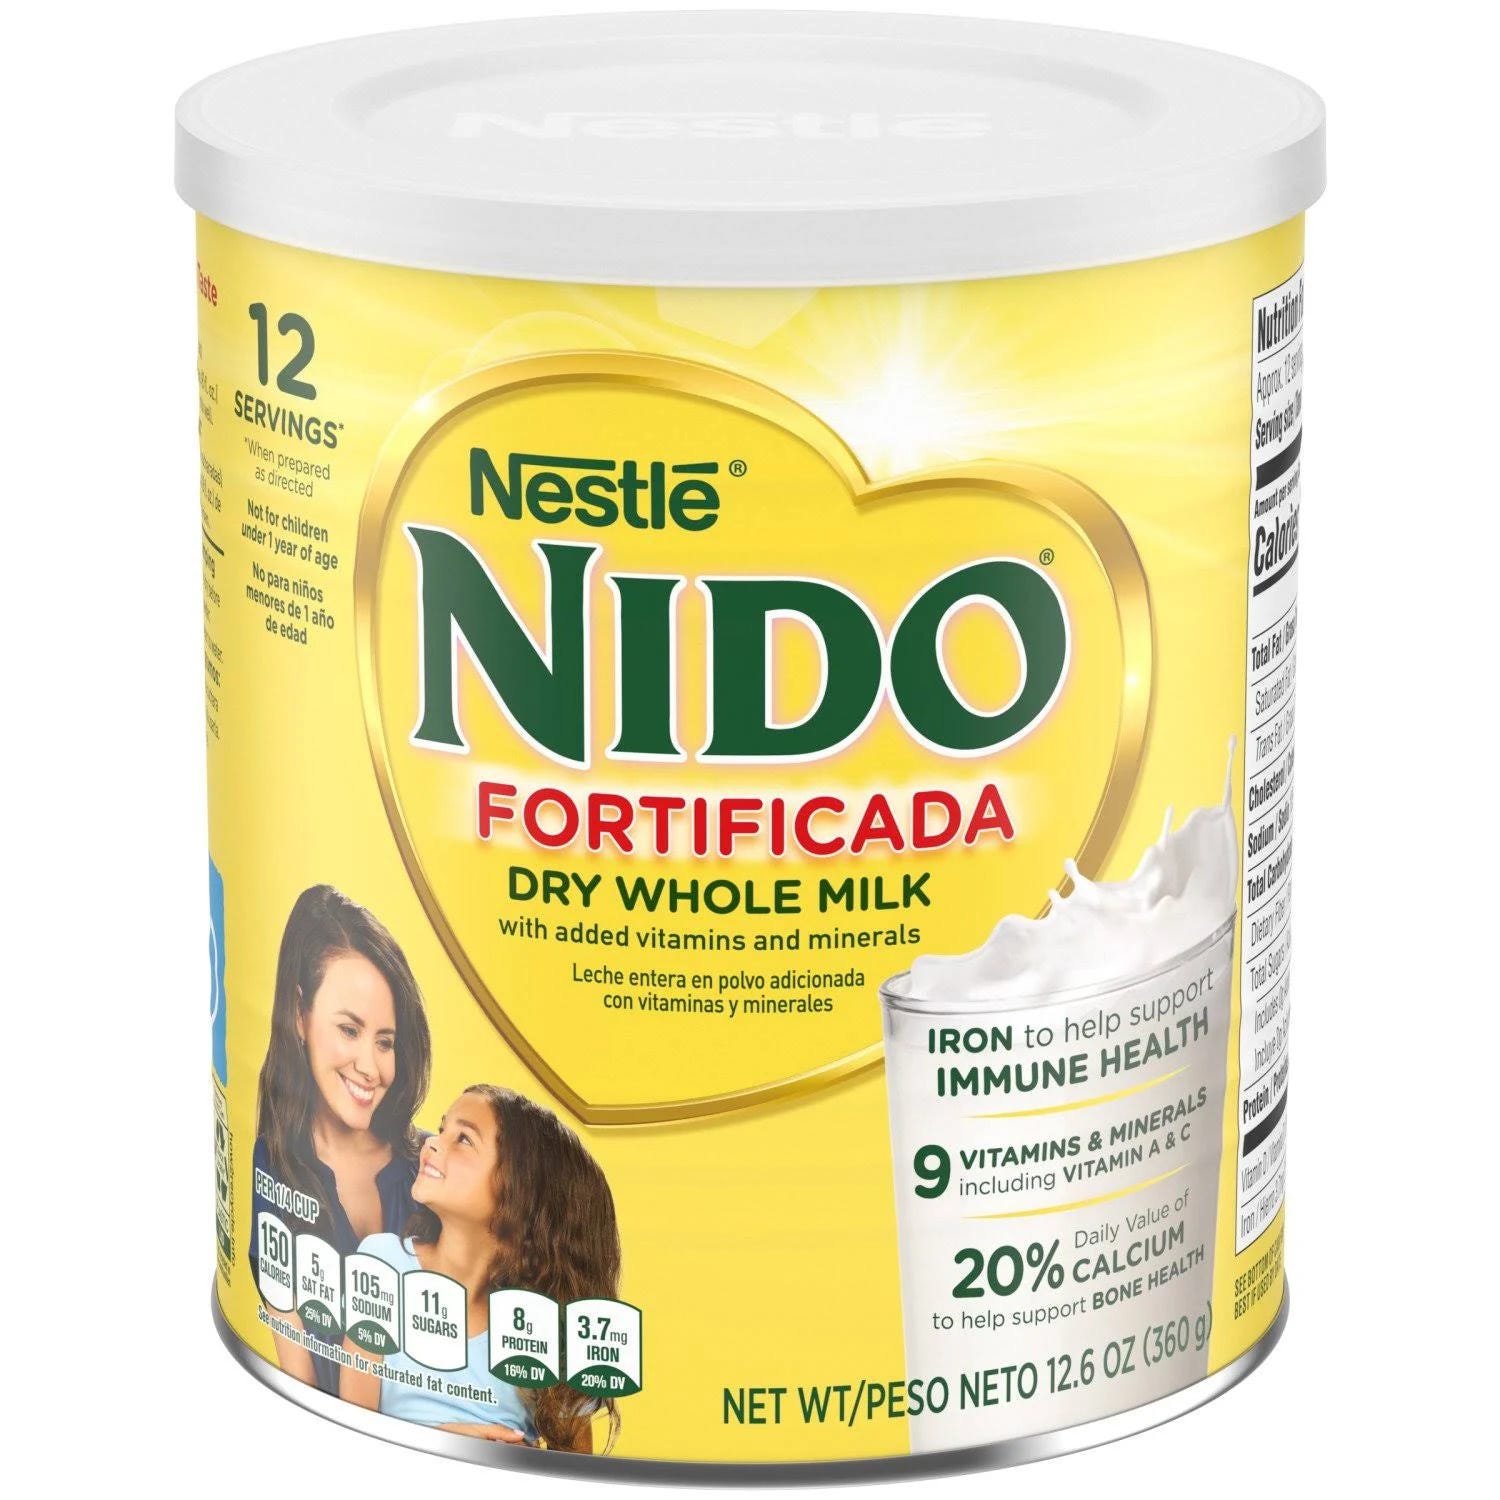 Nido Fortificada Whole Milk Powder: Nutritious for Growth | Image